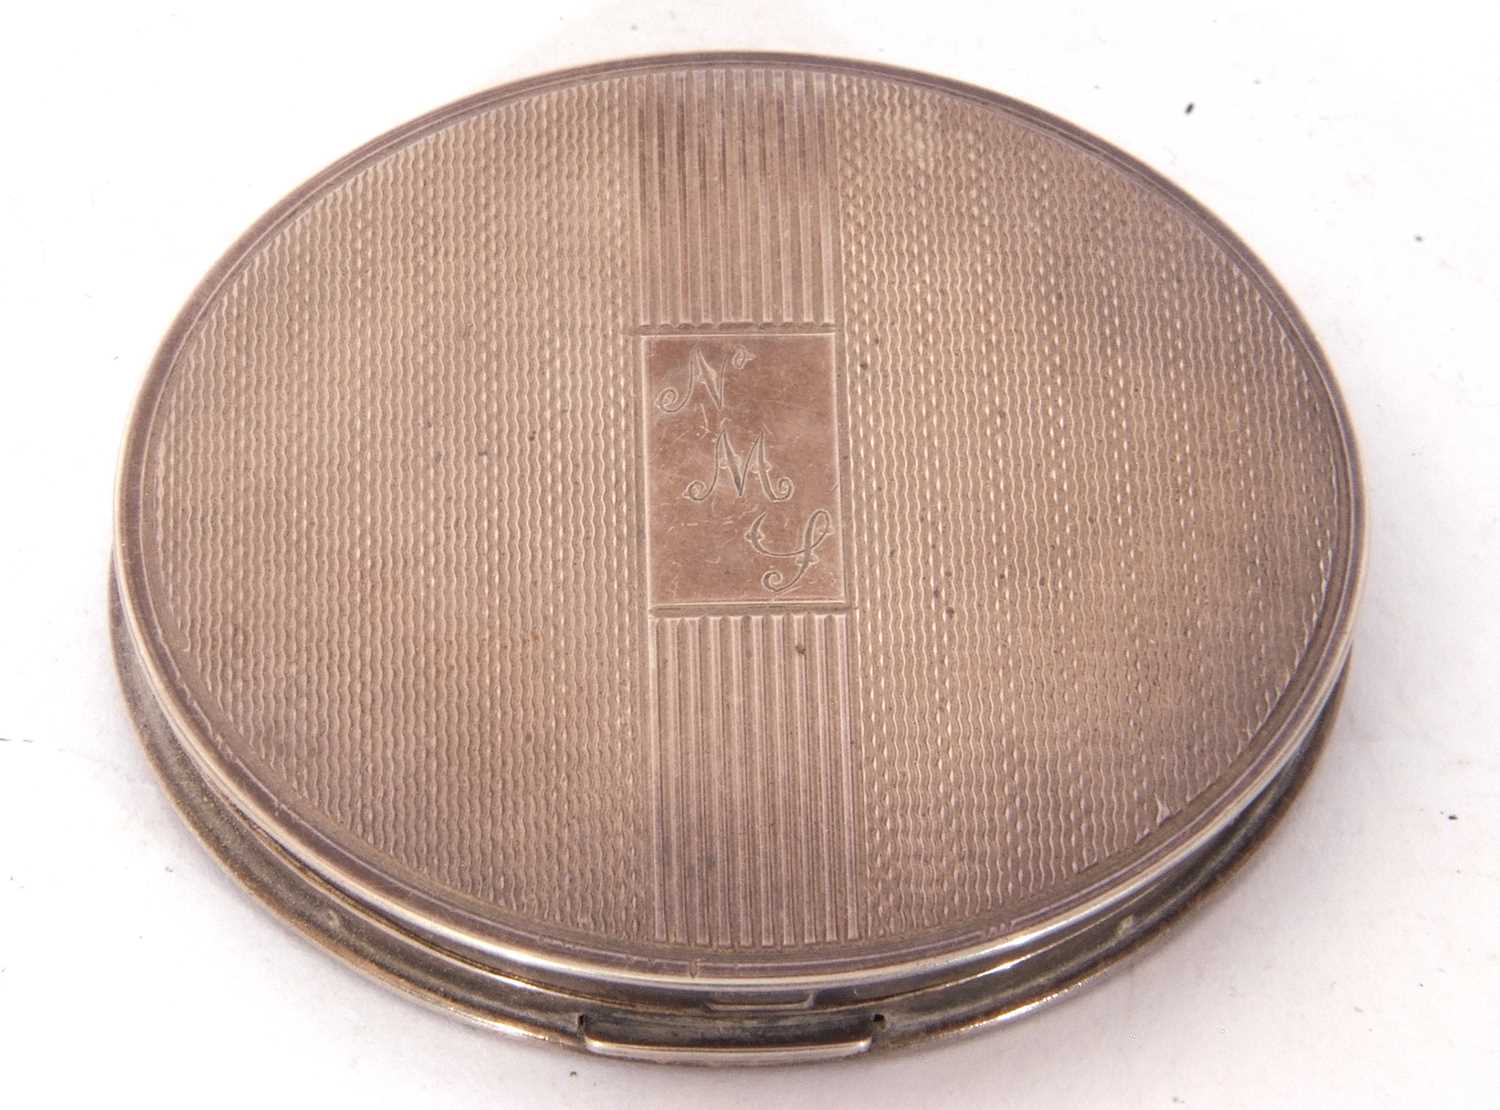 George VI circular compact with banded engine turned decoration having internal mirror and powder